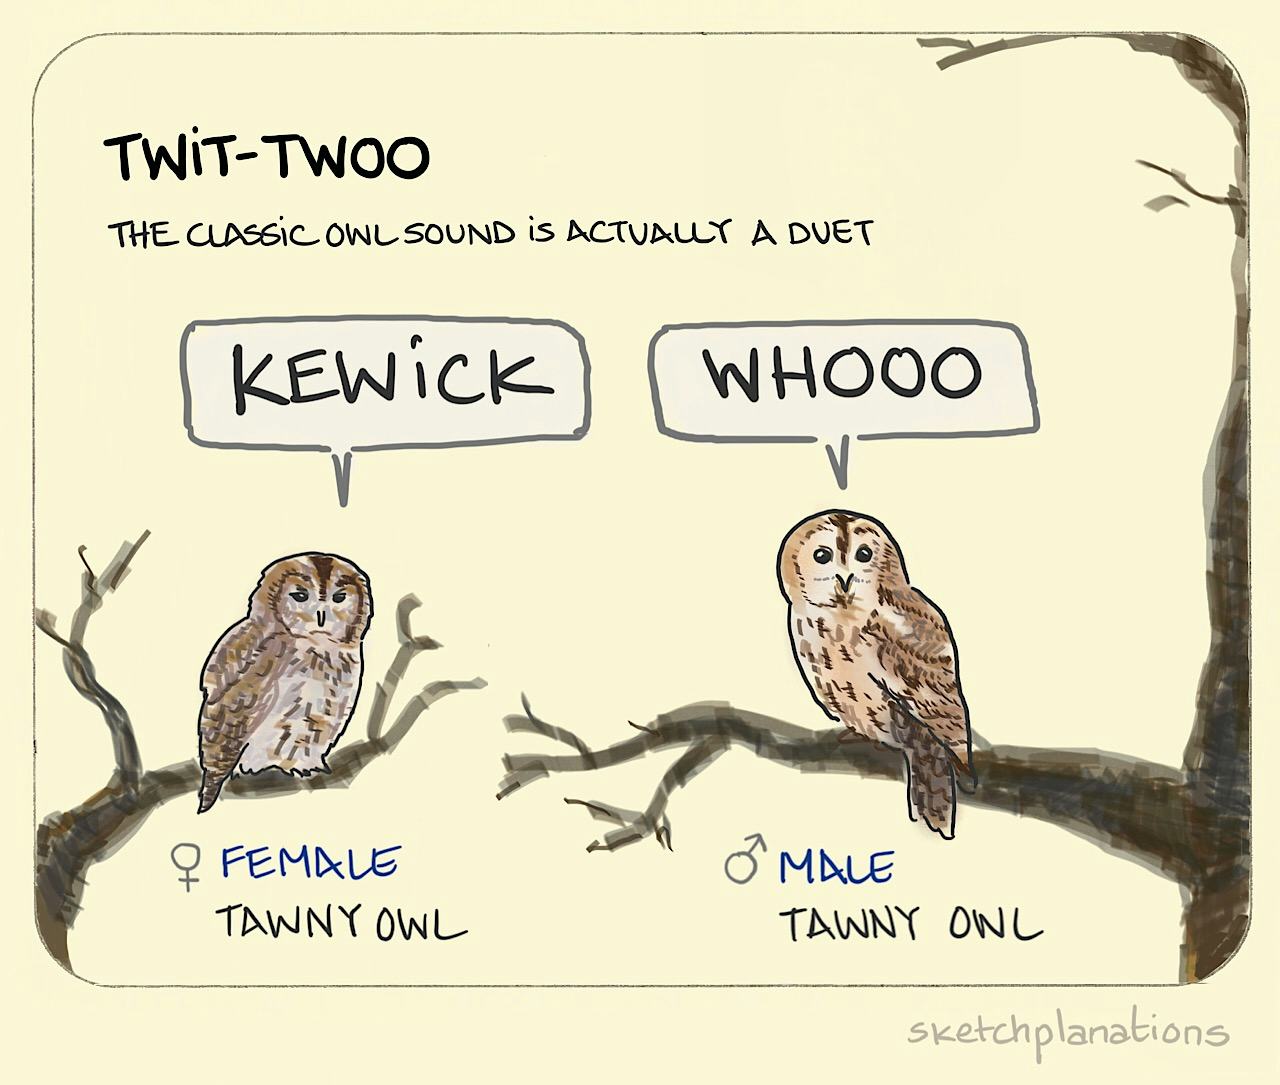 Twit-twoo illustration: showing how the classic owl sound is actually a duet with a female and male tawny owl doing a "kewick" and "whoo"